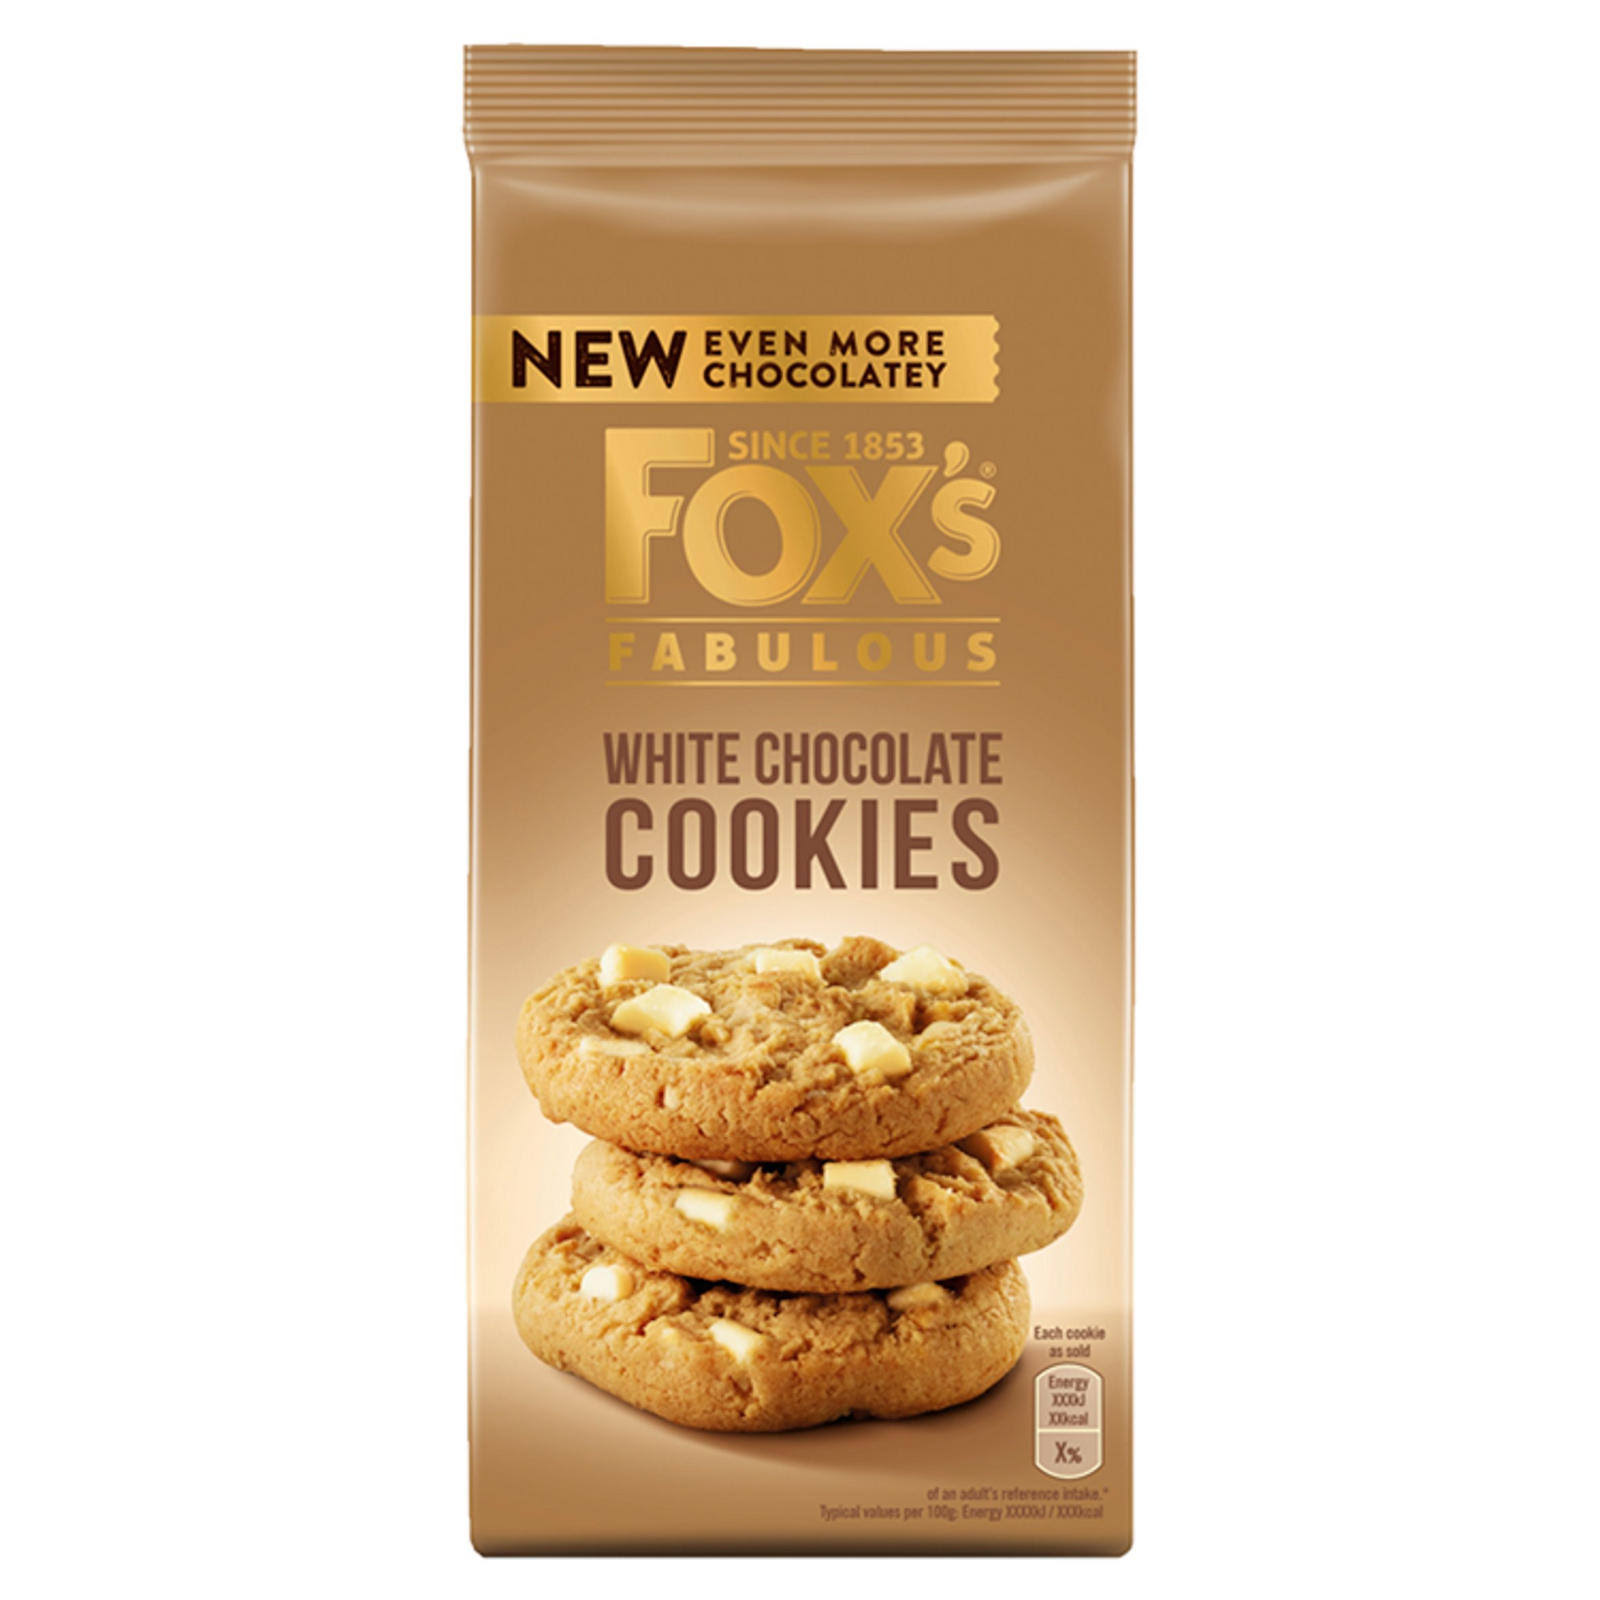 Foxs Chunkie Cookies White Chocolate Delivered to Ireland